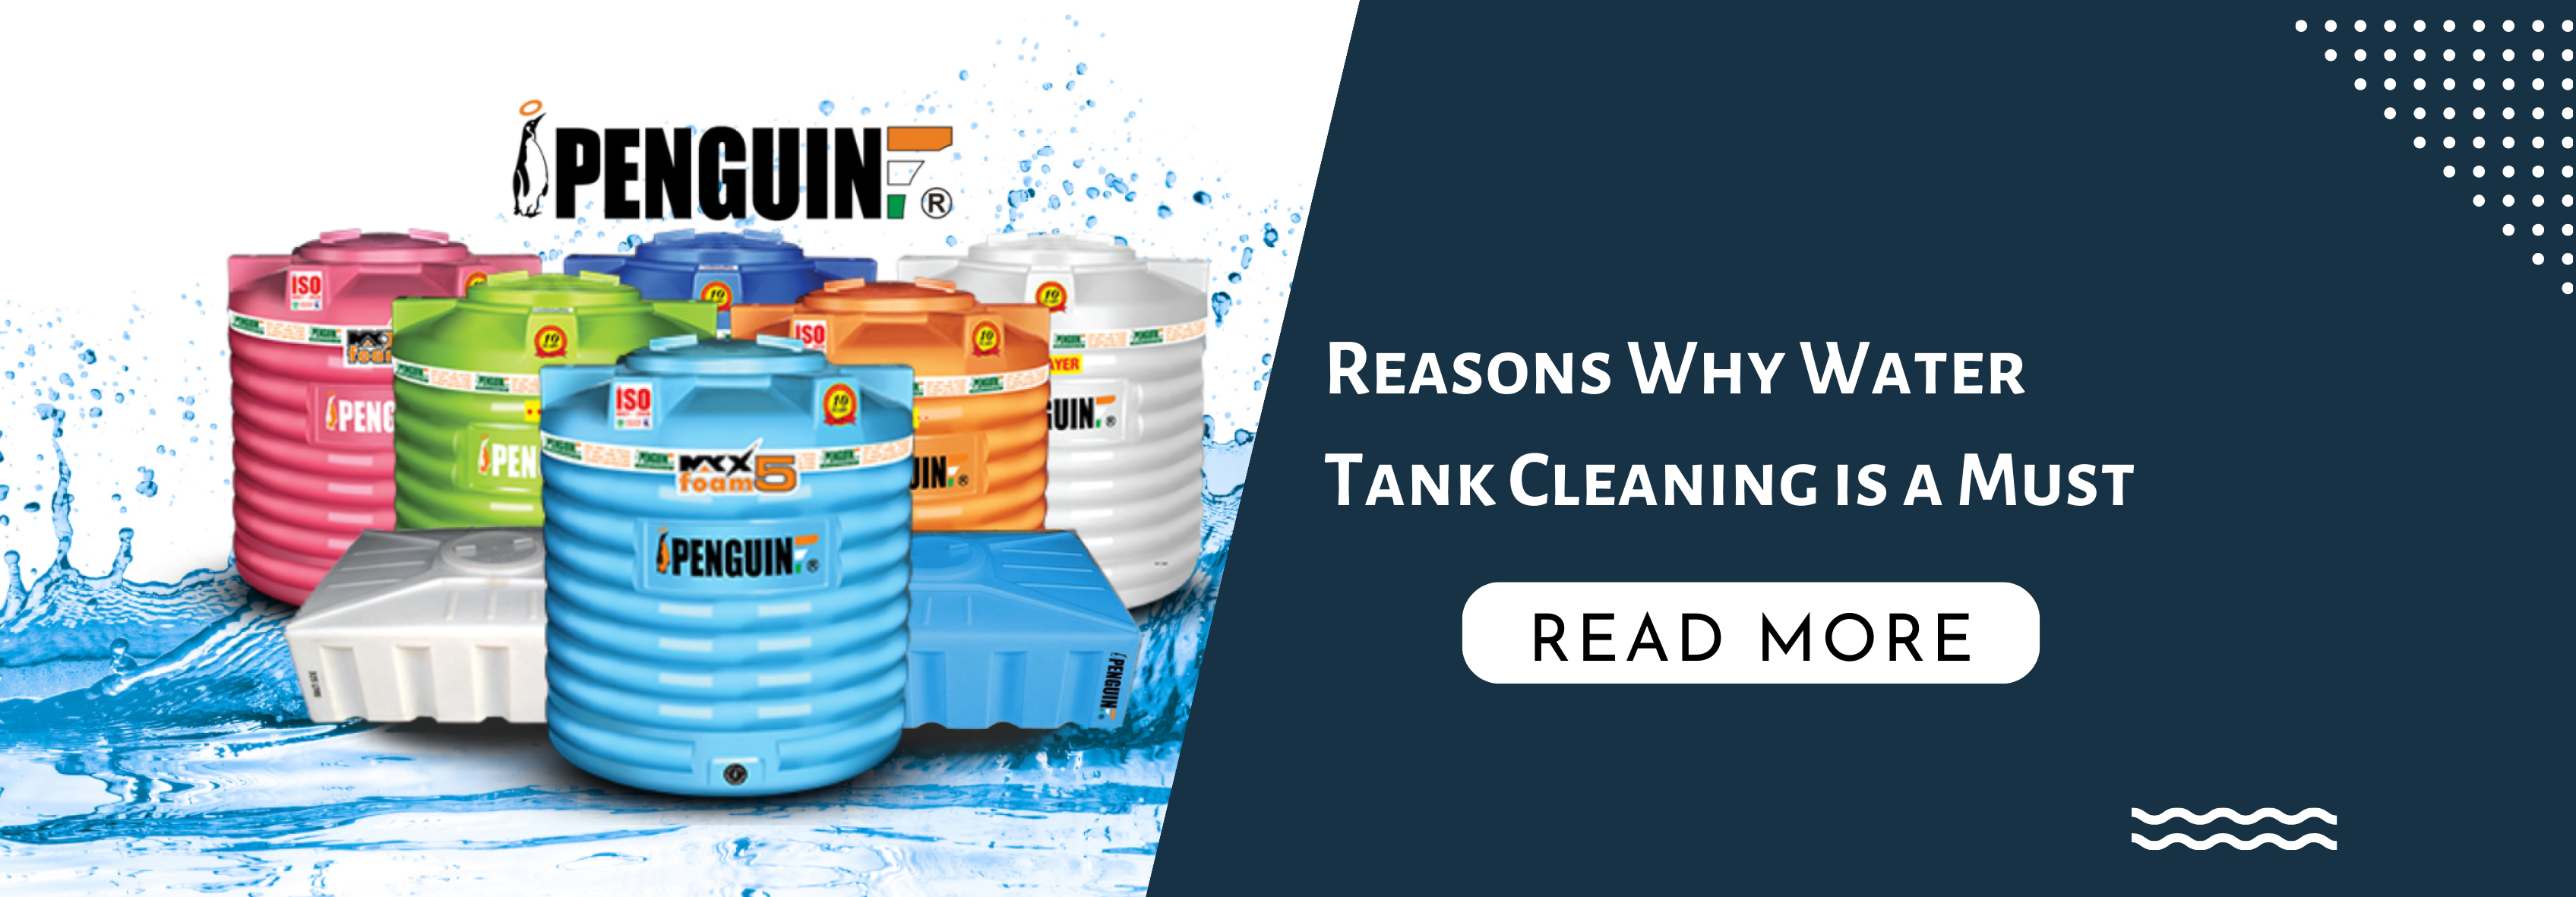 Reasons Why Water Tank Cleaning is a Must